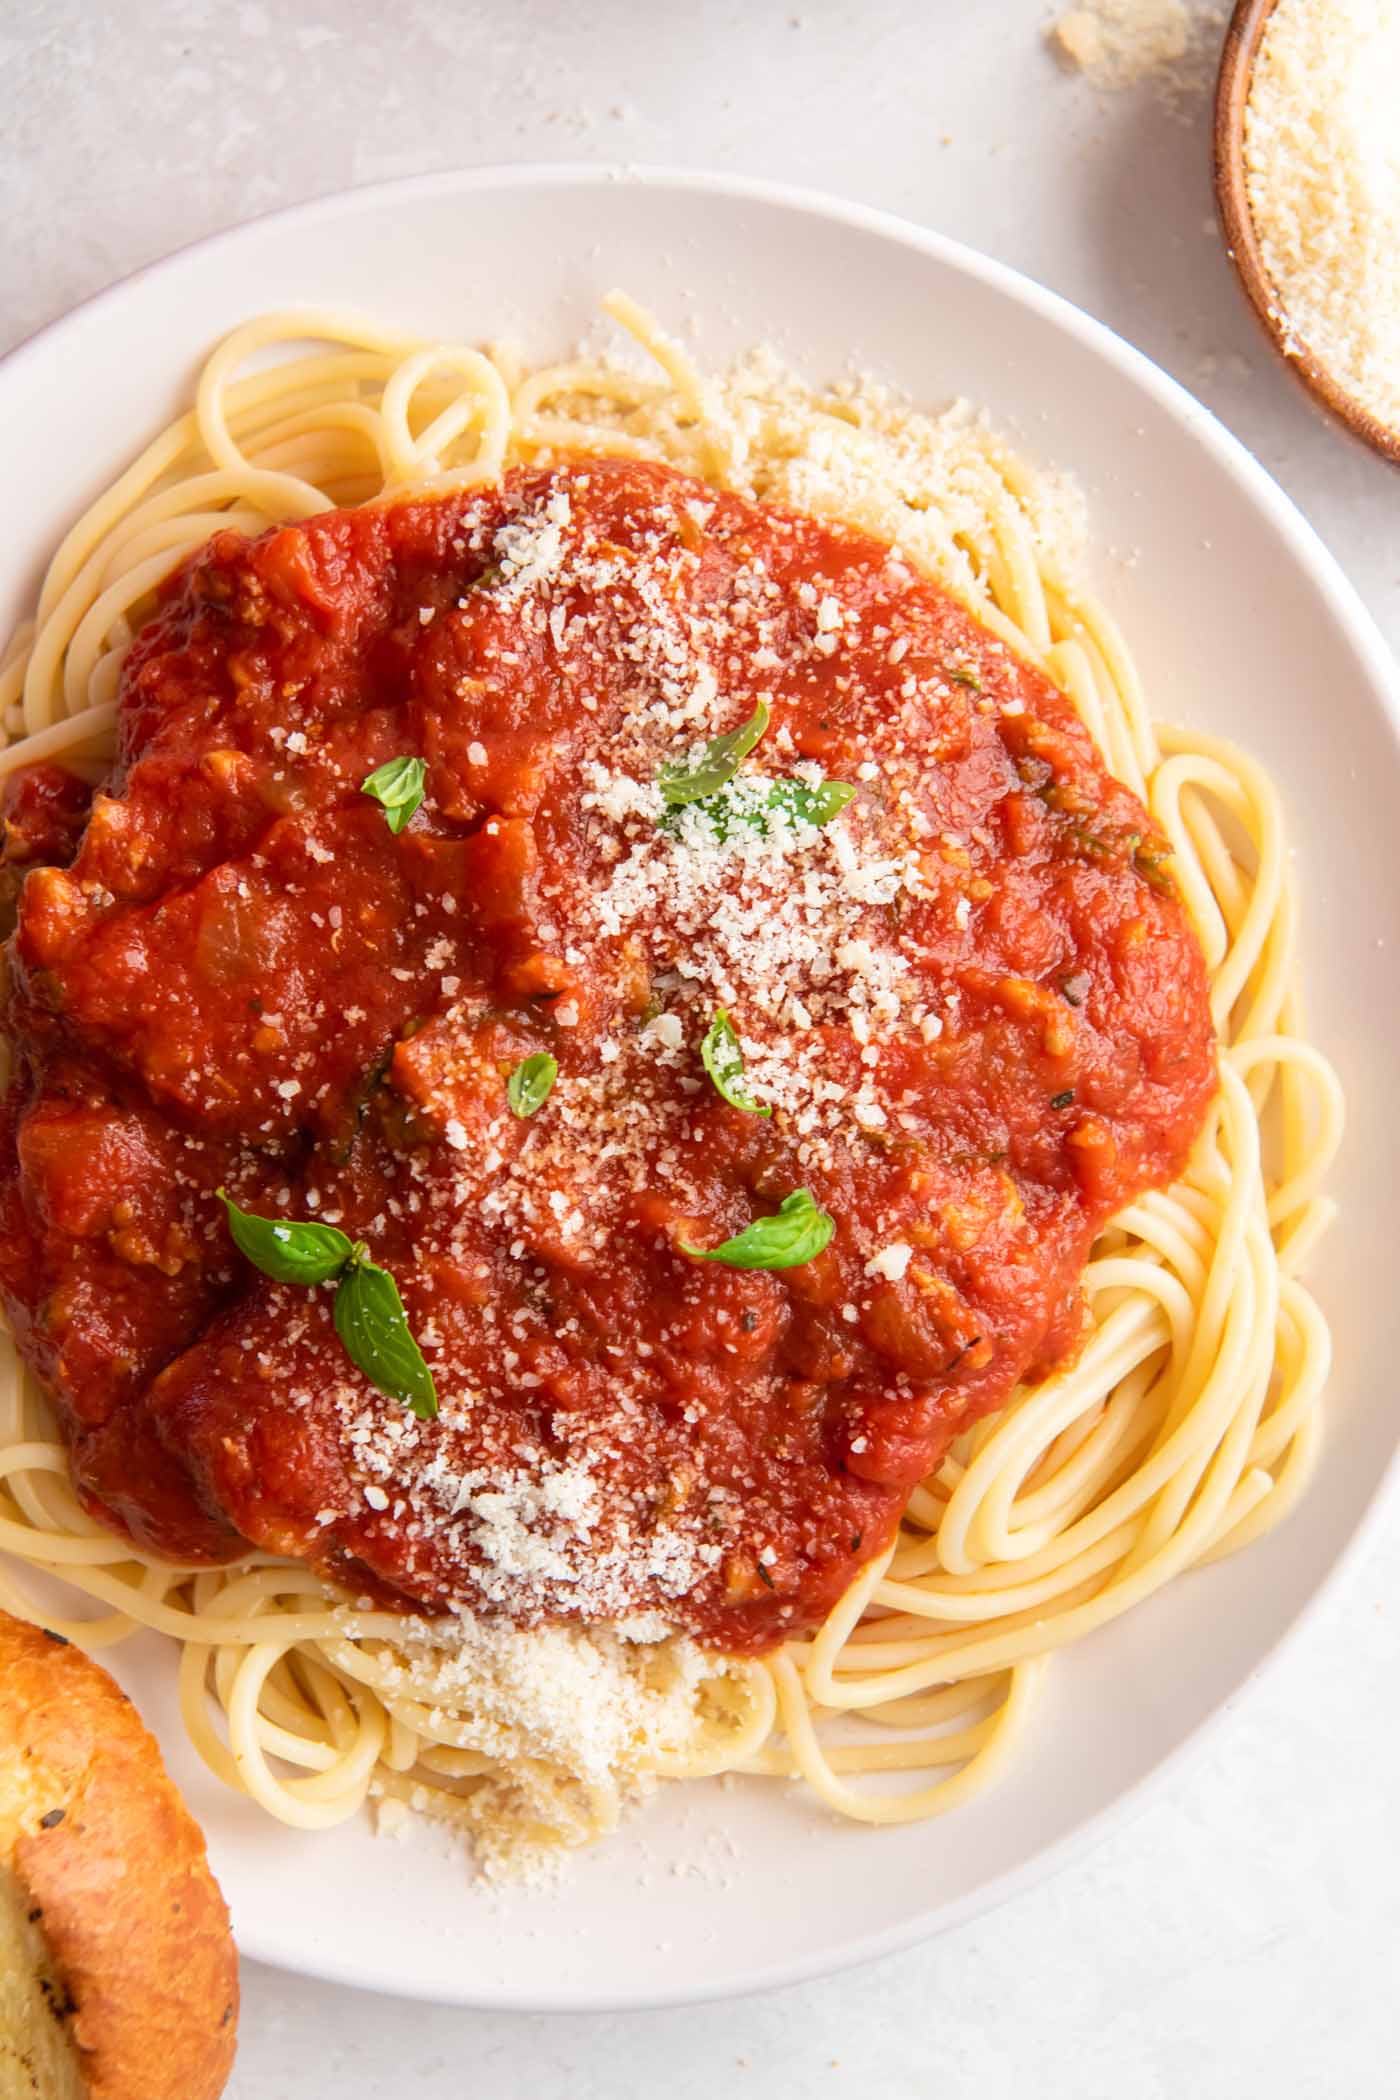 Homemade spaghetti sauce served over spaghetti with grated parmesan and fresh basil.